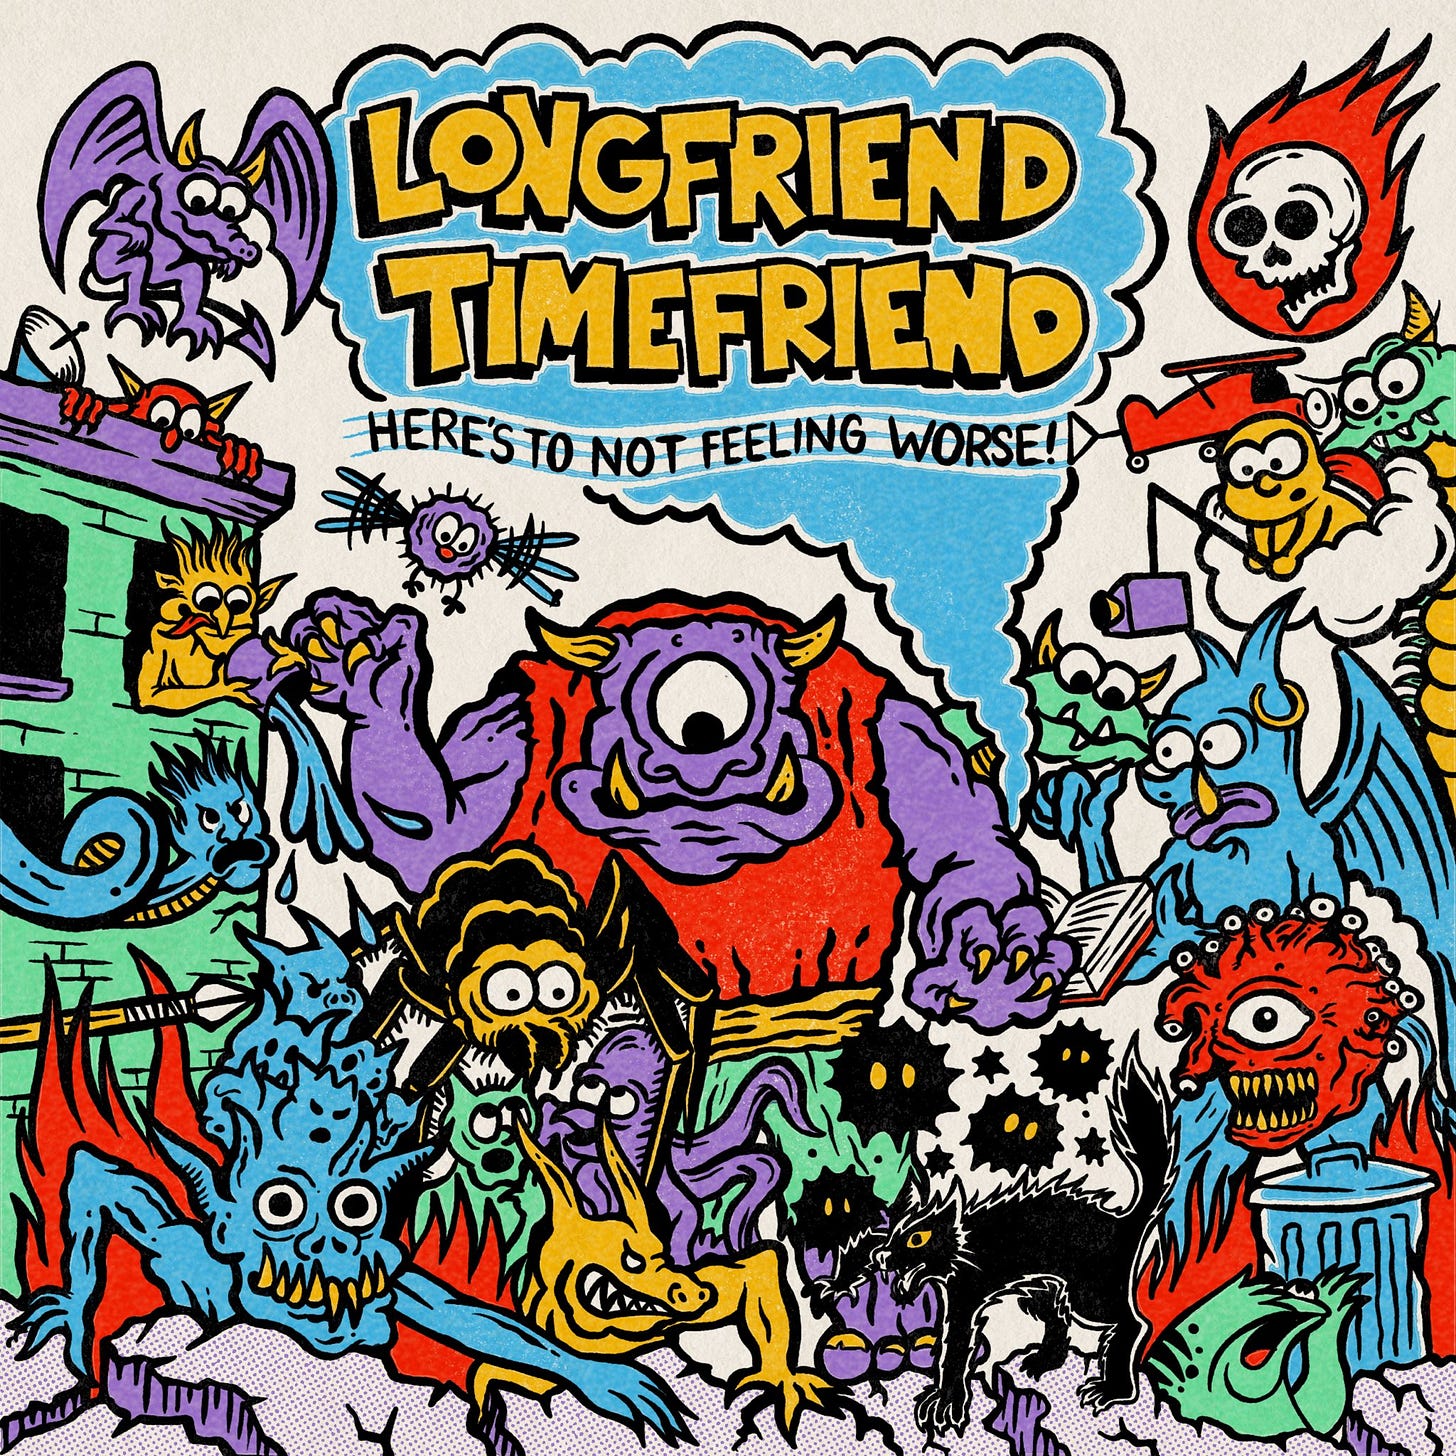 Longfriend Timefriend ✨️NEW ALBUM OUT FRIDAY✨️ on X: "IT'S COMING: our new  record “Here's to Not Feeling Worse” drops this Friday 3/15. Frankly, I  think it's gonna blow your ass clean off.